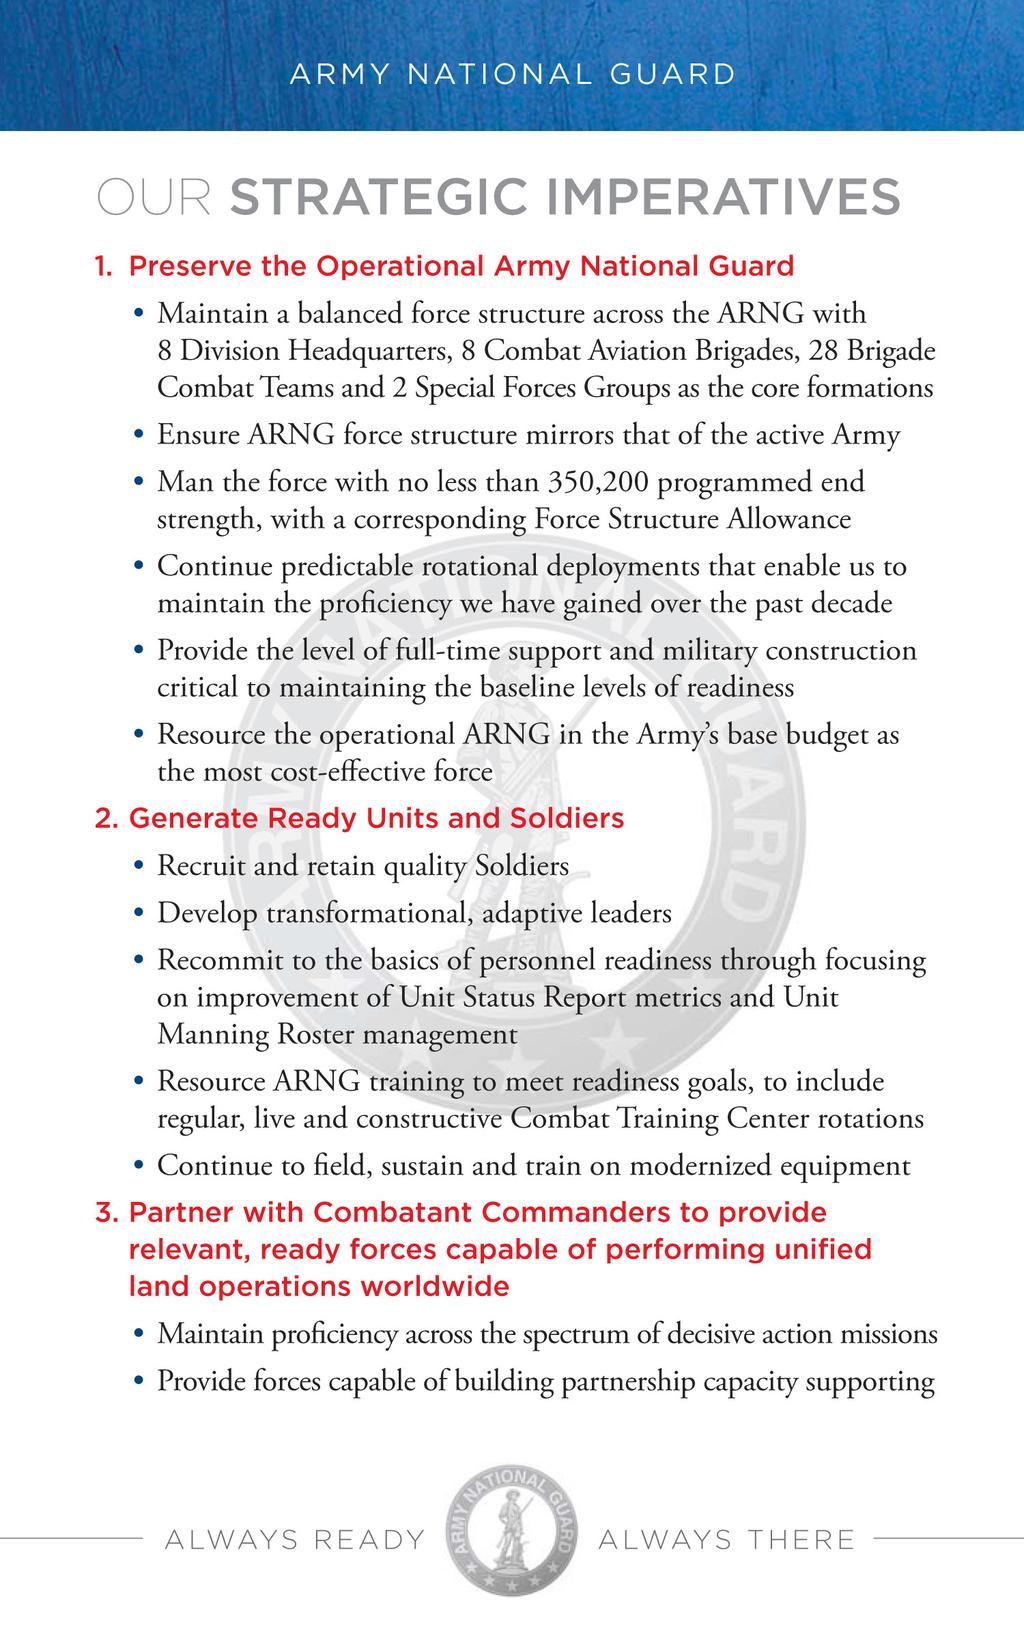 Alabama Guardsman 7 The next two pages contain the strategic imperatives for the National Guard from